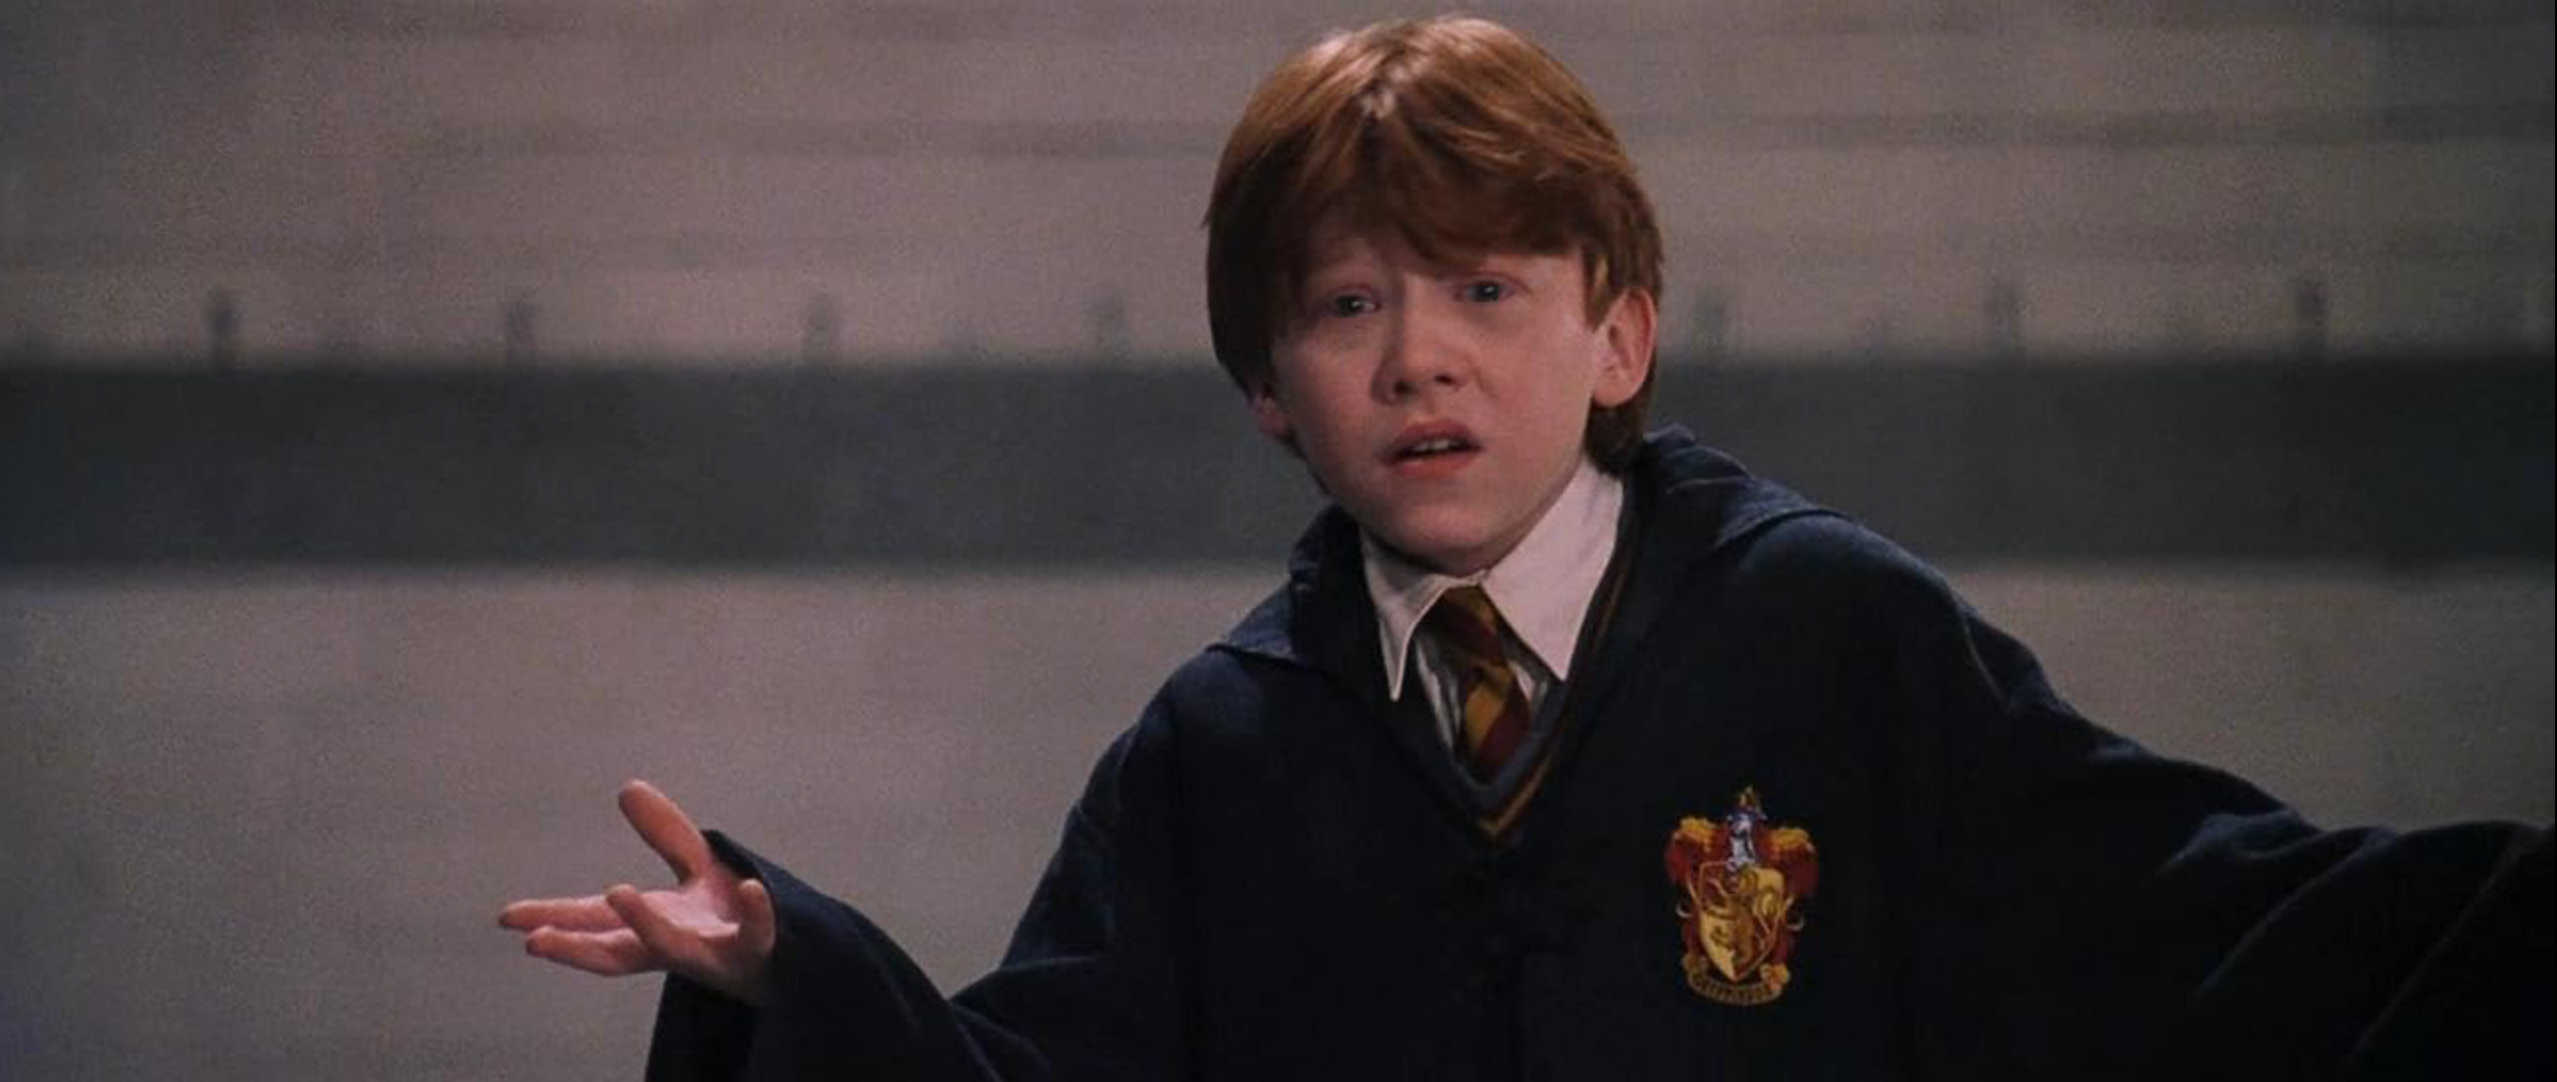 <ul> <li><strong>Who said it:</strong> Ronald Weasley</li> <li><strong>Played by:</strong>Rupert Grint</li> <li><strong>Movie:</strong> Harry Potter and the Sorcerer's Stone (2001)</li> </ul> <p>In "Harry Potter and the Sorcerer's Stone," Neville Longbottom tries to prevent Harry, Ron and Hermione from leaving their room at night, so Hermione casts a spell on him that leaves him temporarily paralyzed. This quote was Ron's response to Hermione after Neville falls to the floor.</p>